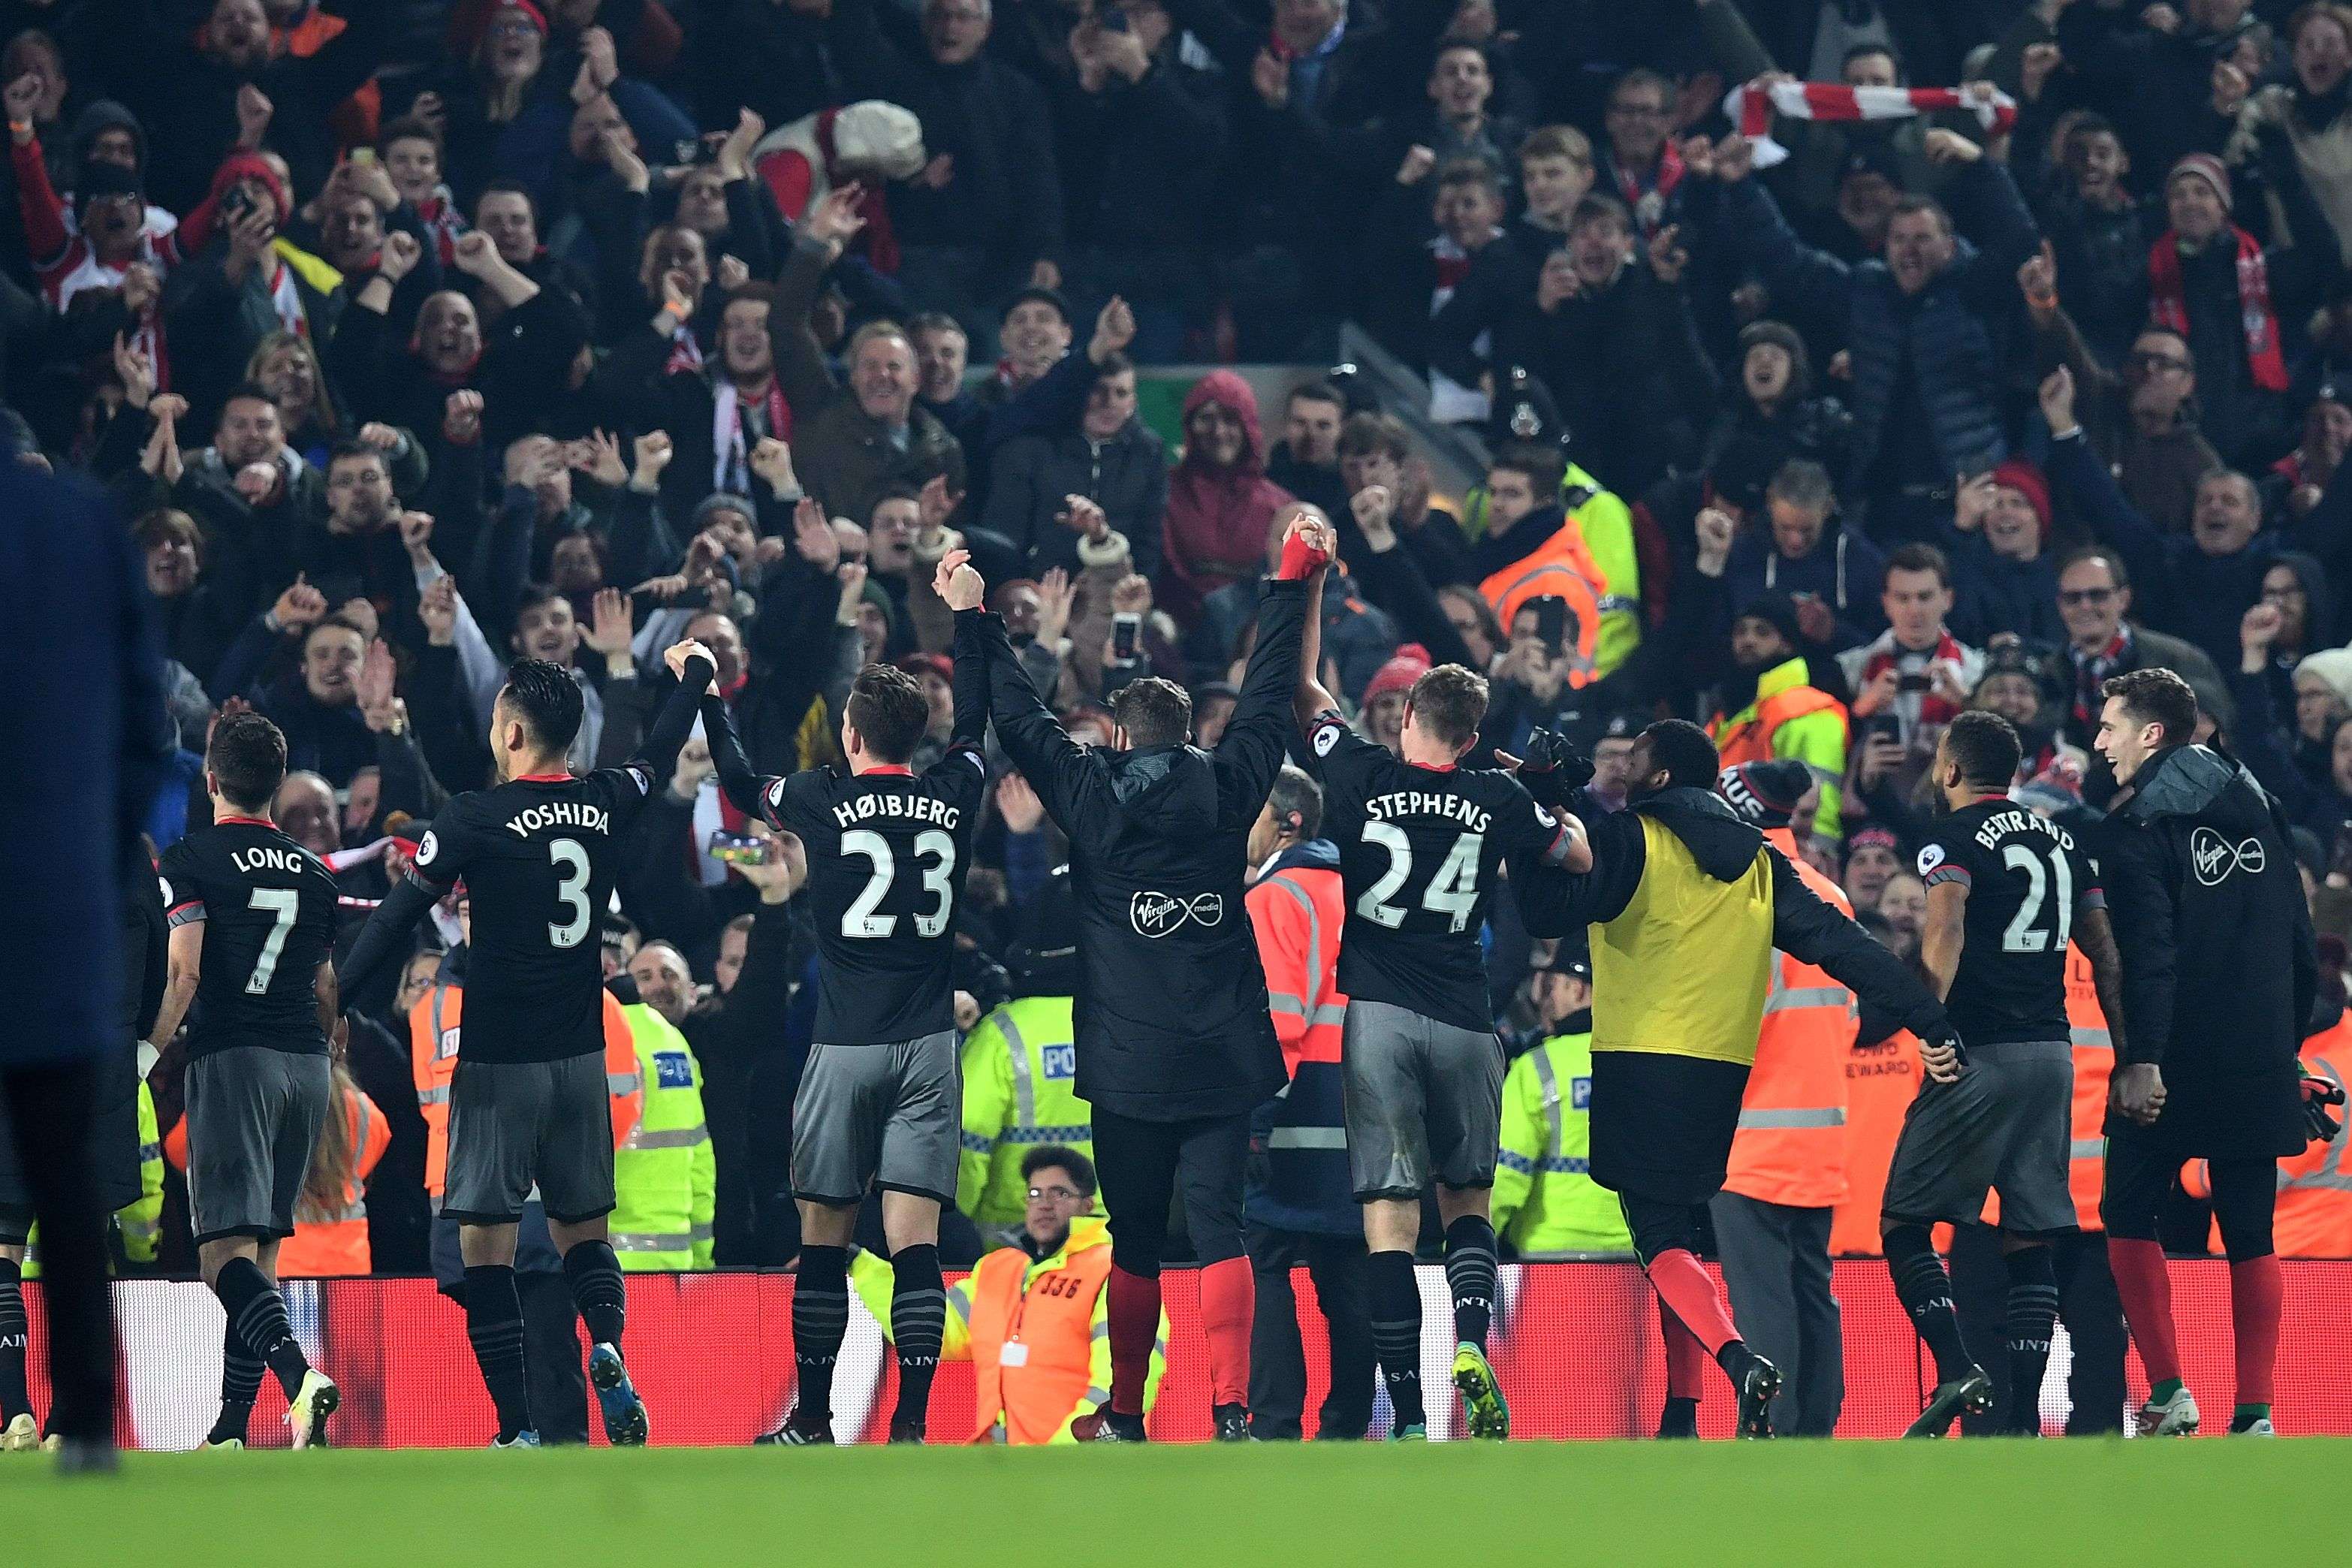 Southampton players applaud their fans after their League Cup semi-final victory over Liverpool. Photo: AFP